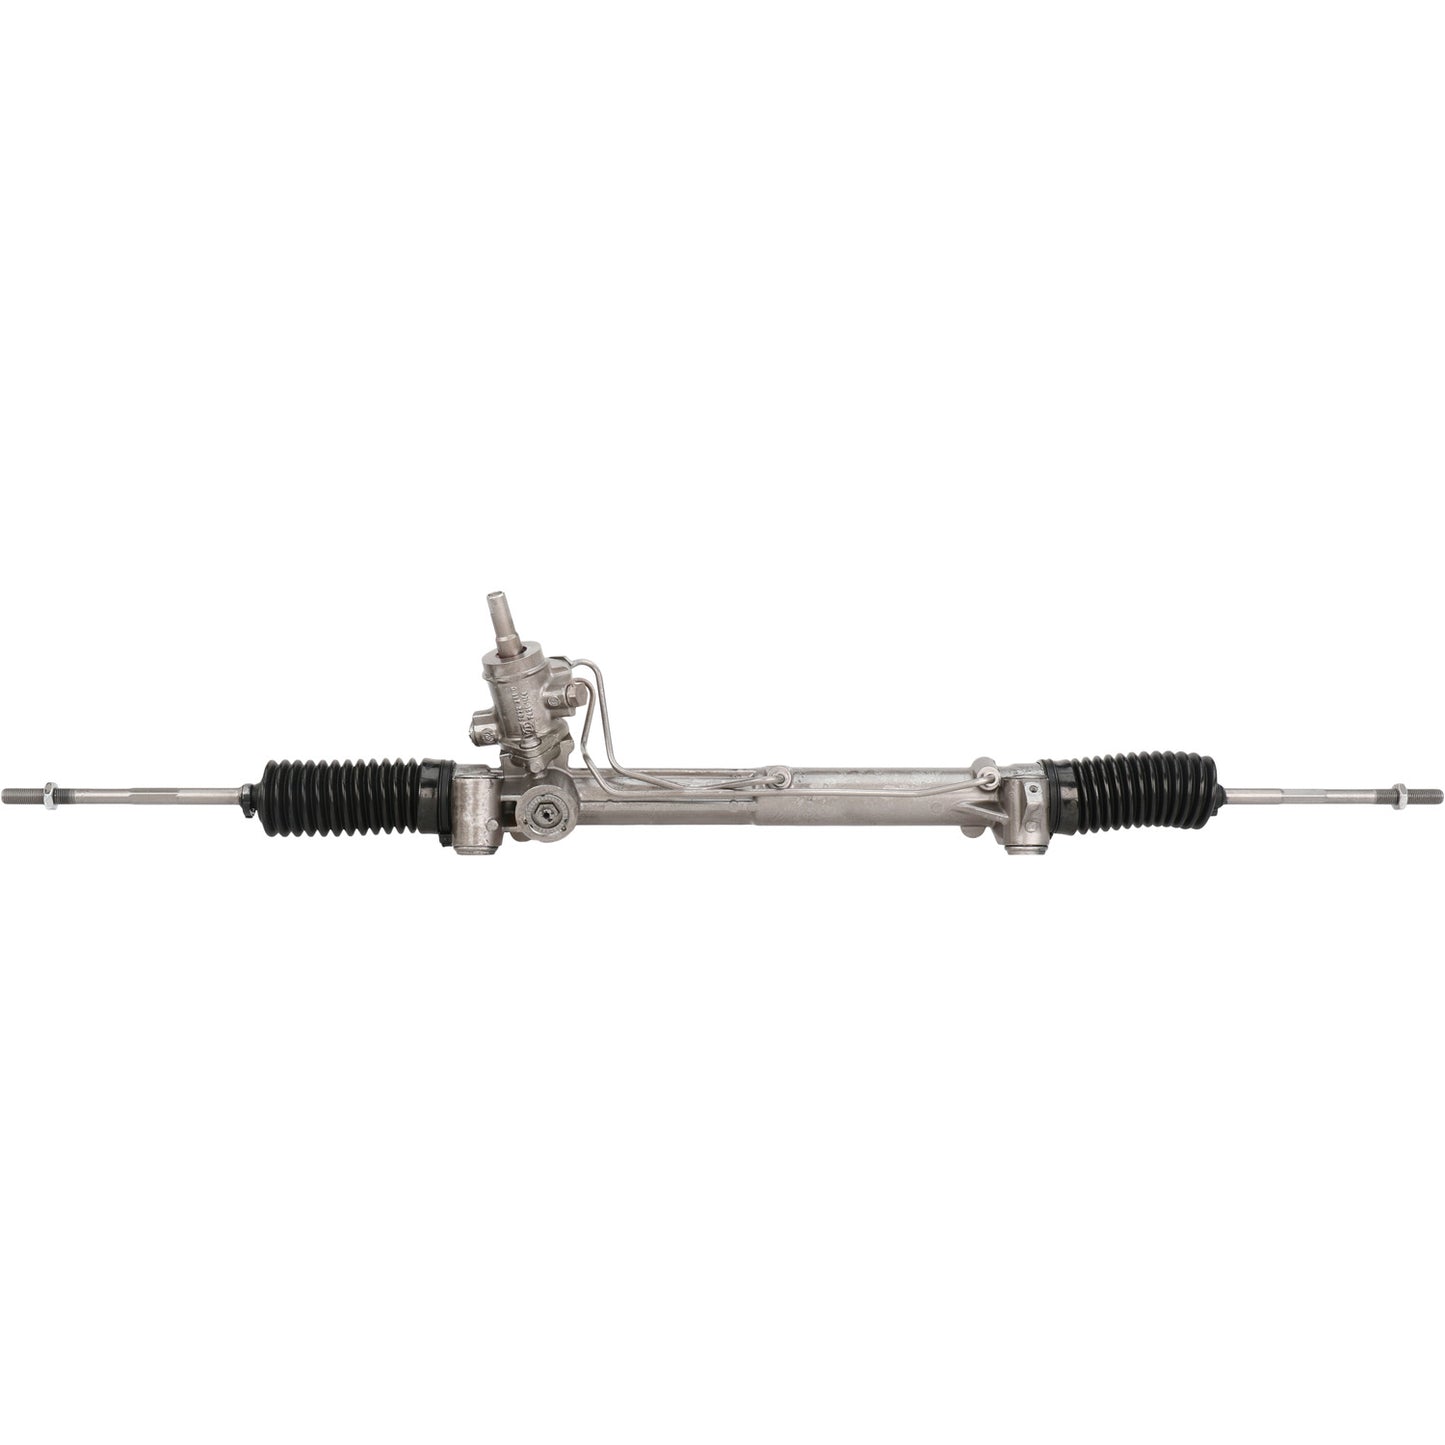 Rack and Pinion Assembly - MAVAL - Hydraulic Power - Remanufactured - 9380M